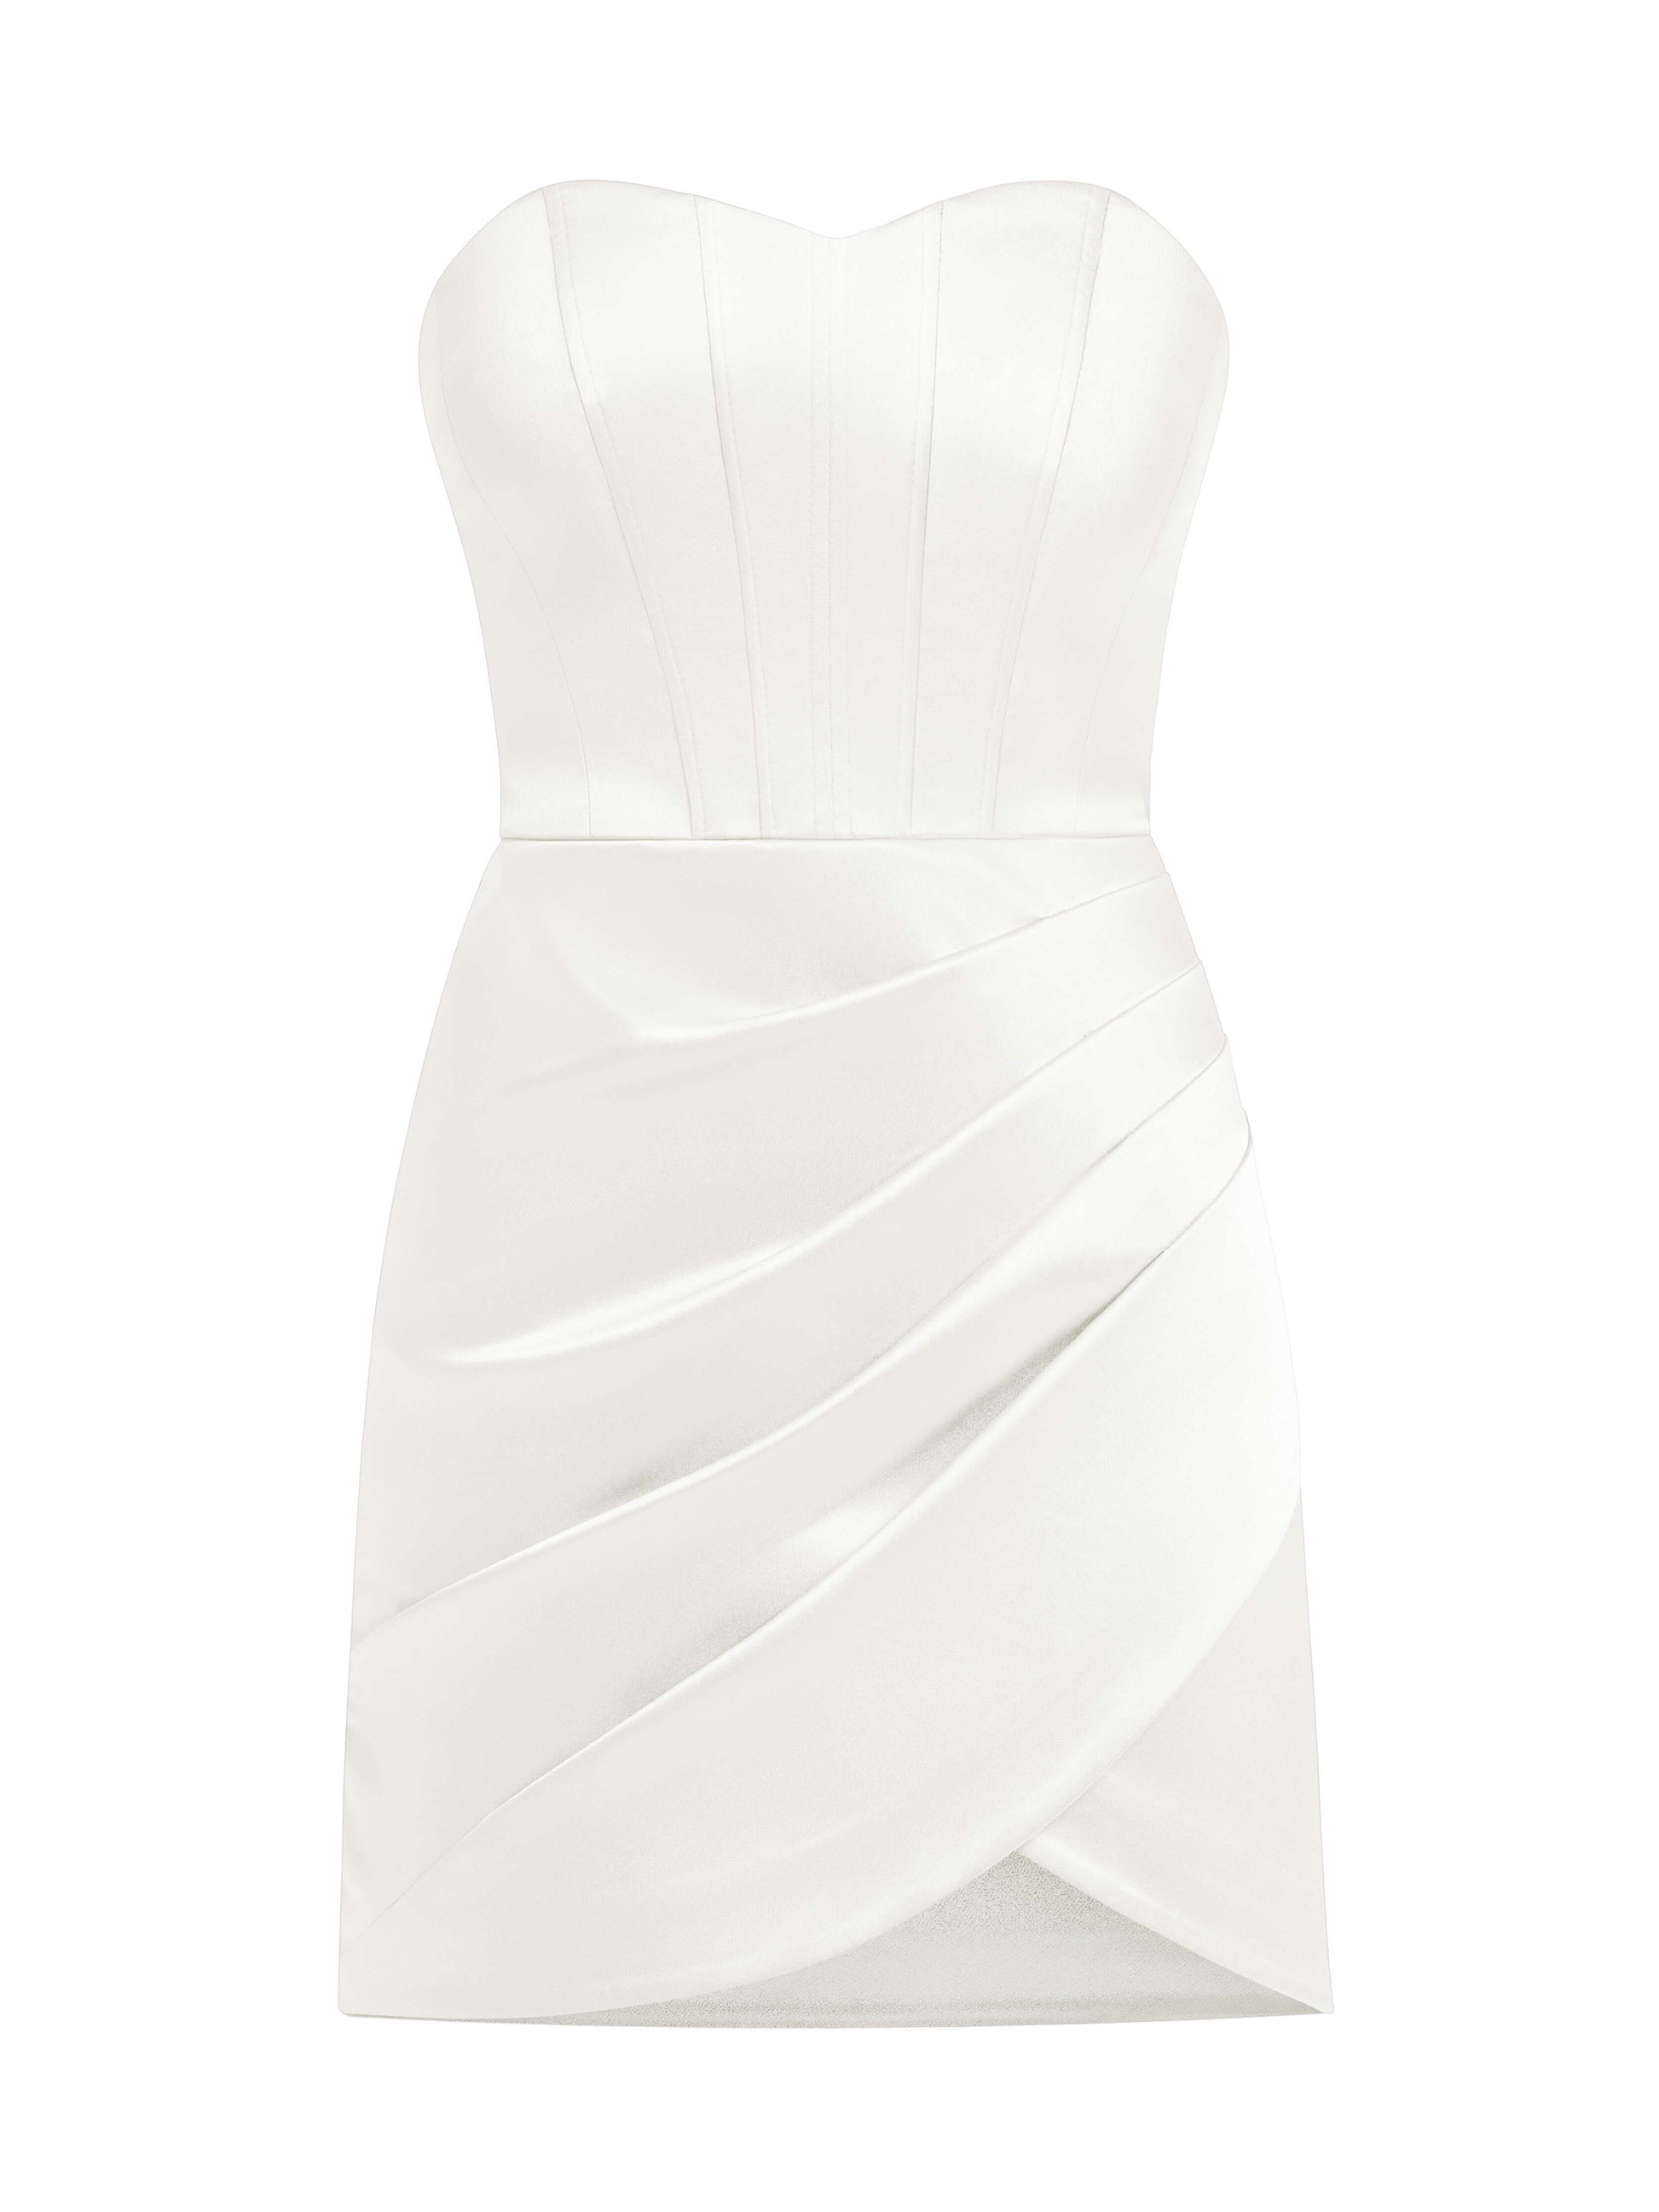 A Touch of Glamour Mini Dress - Pearl White by Tia Dorraine Women's Luxury Fashion Designer Clothing Brand